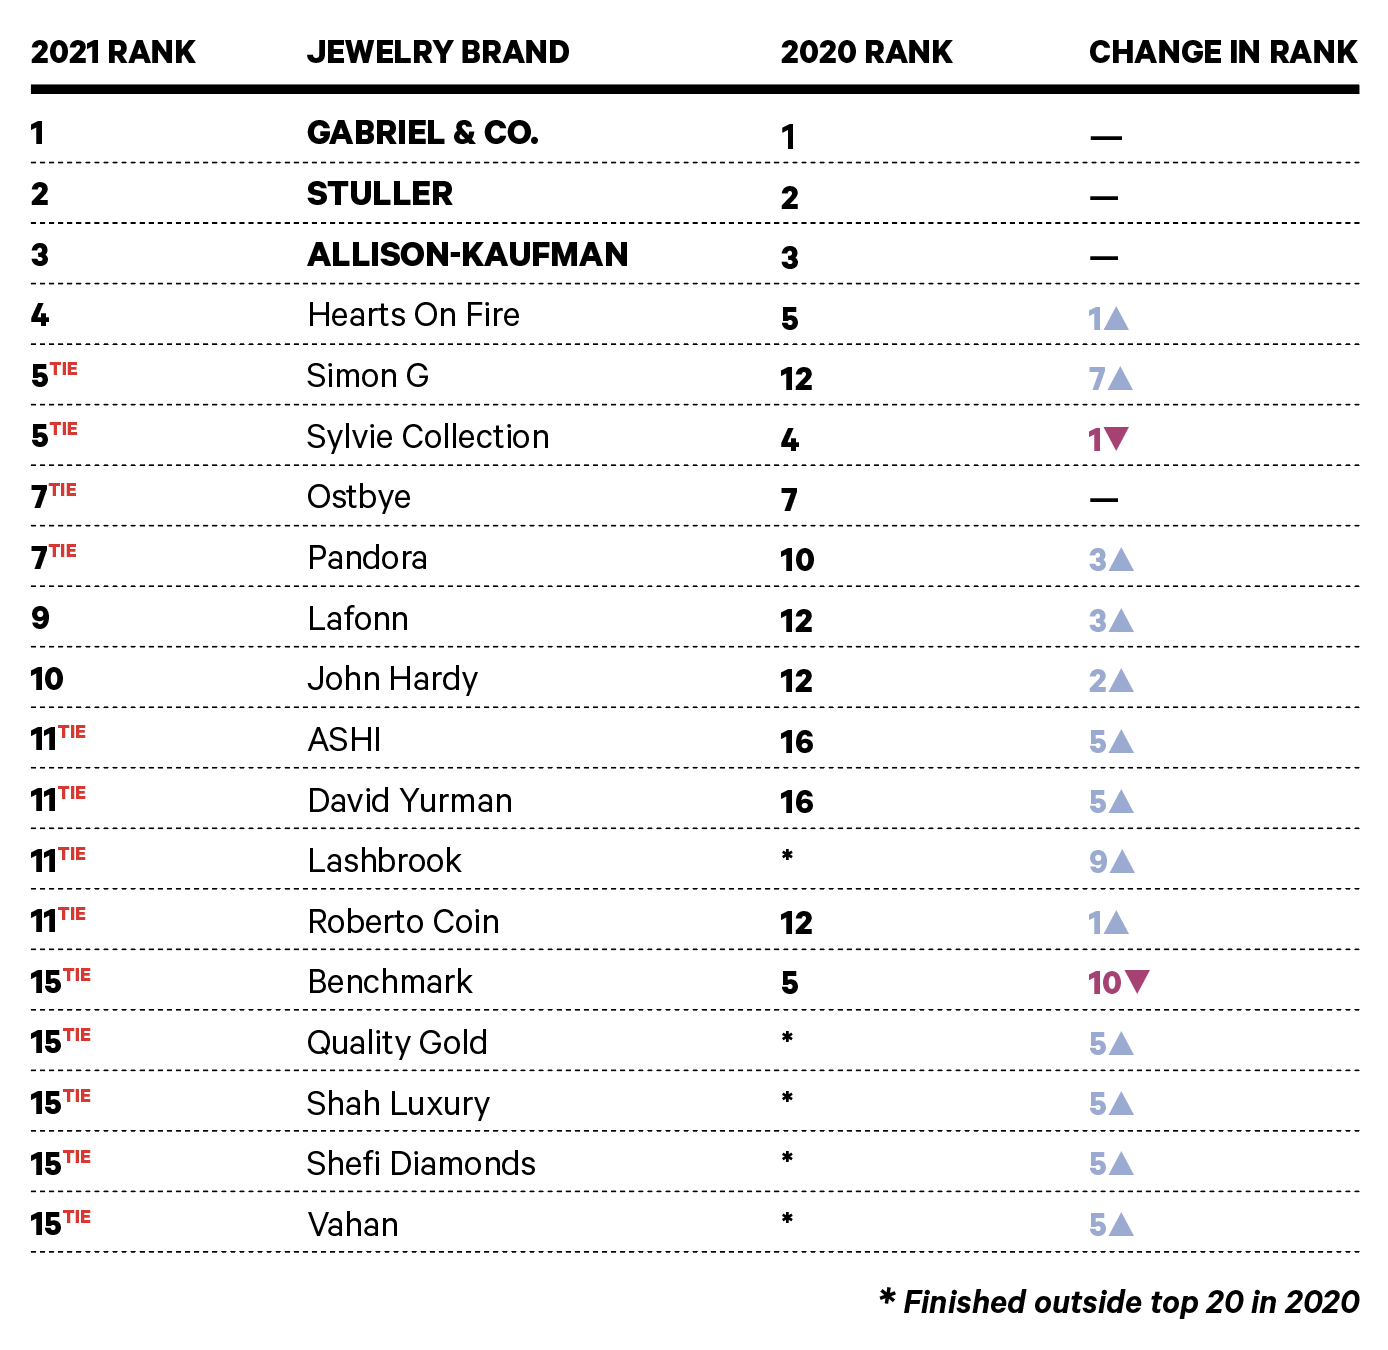 These Are the Top Jewelry Brands of 2021, According to the Big Survey